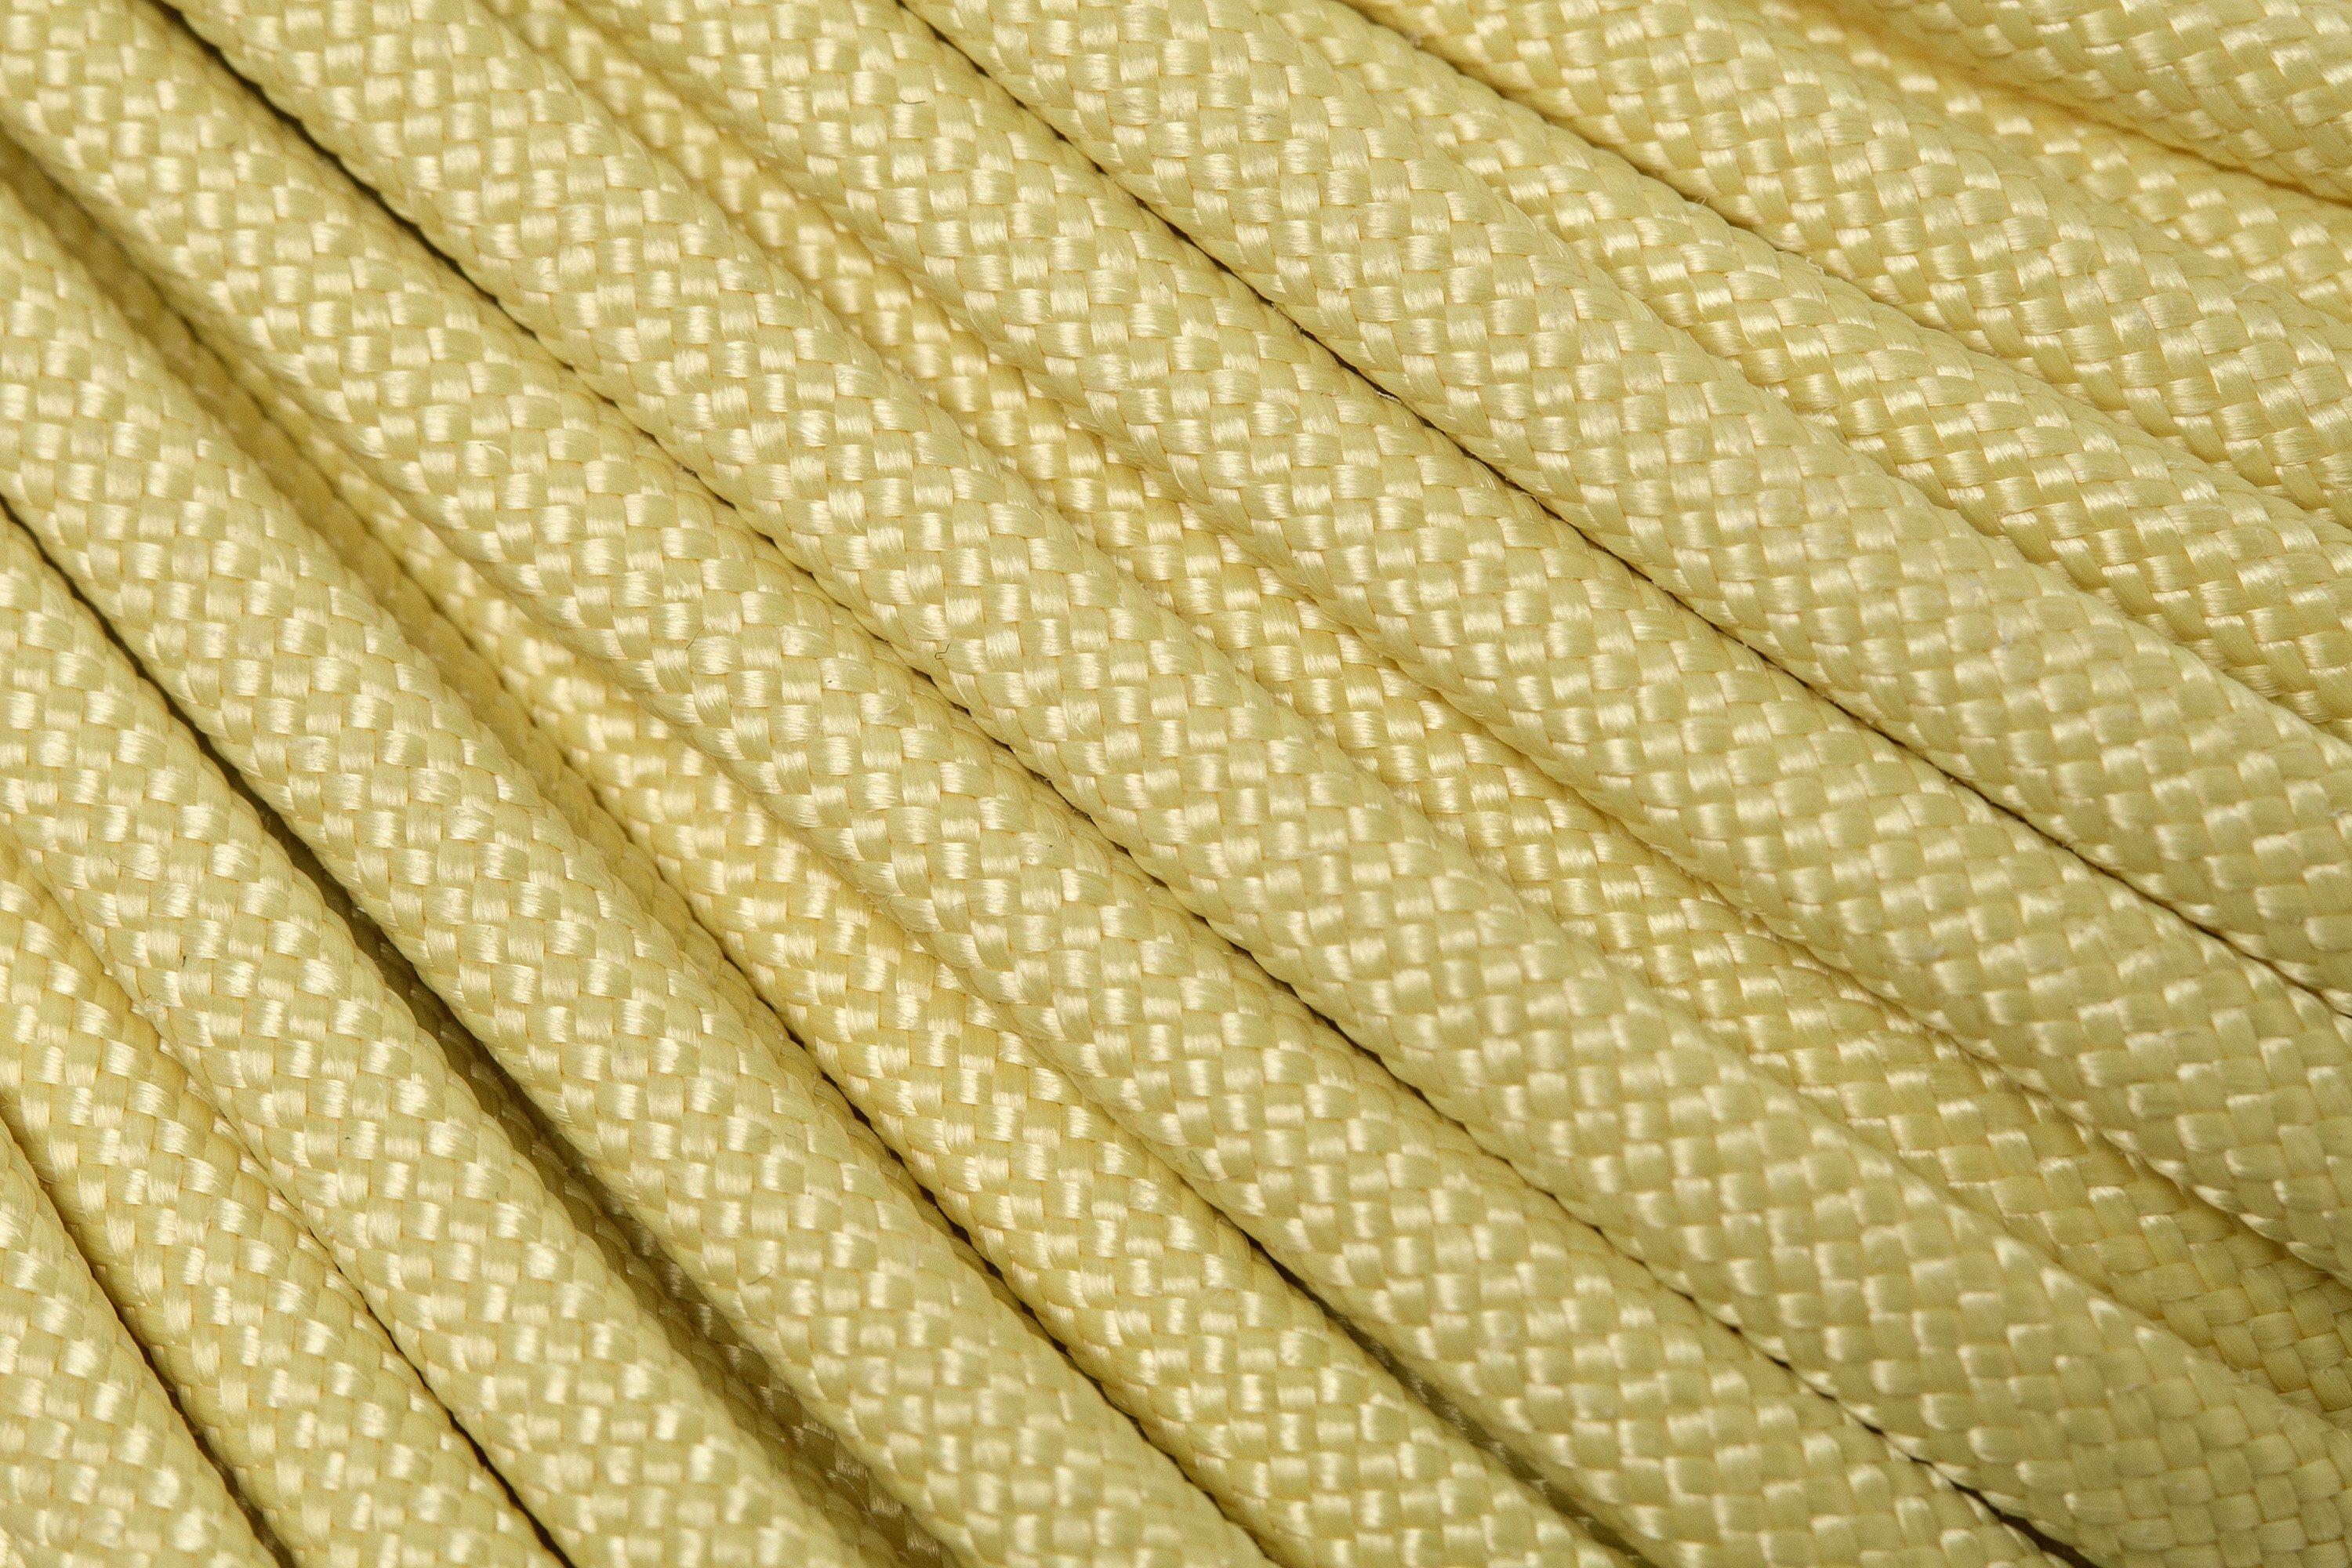 Atwood Rope MFG Kevlar Paracord, colour: yellow, 50 ft (15.24m)